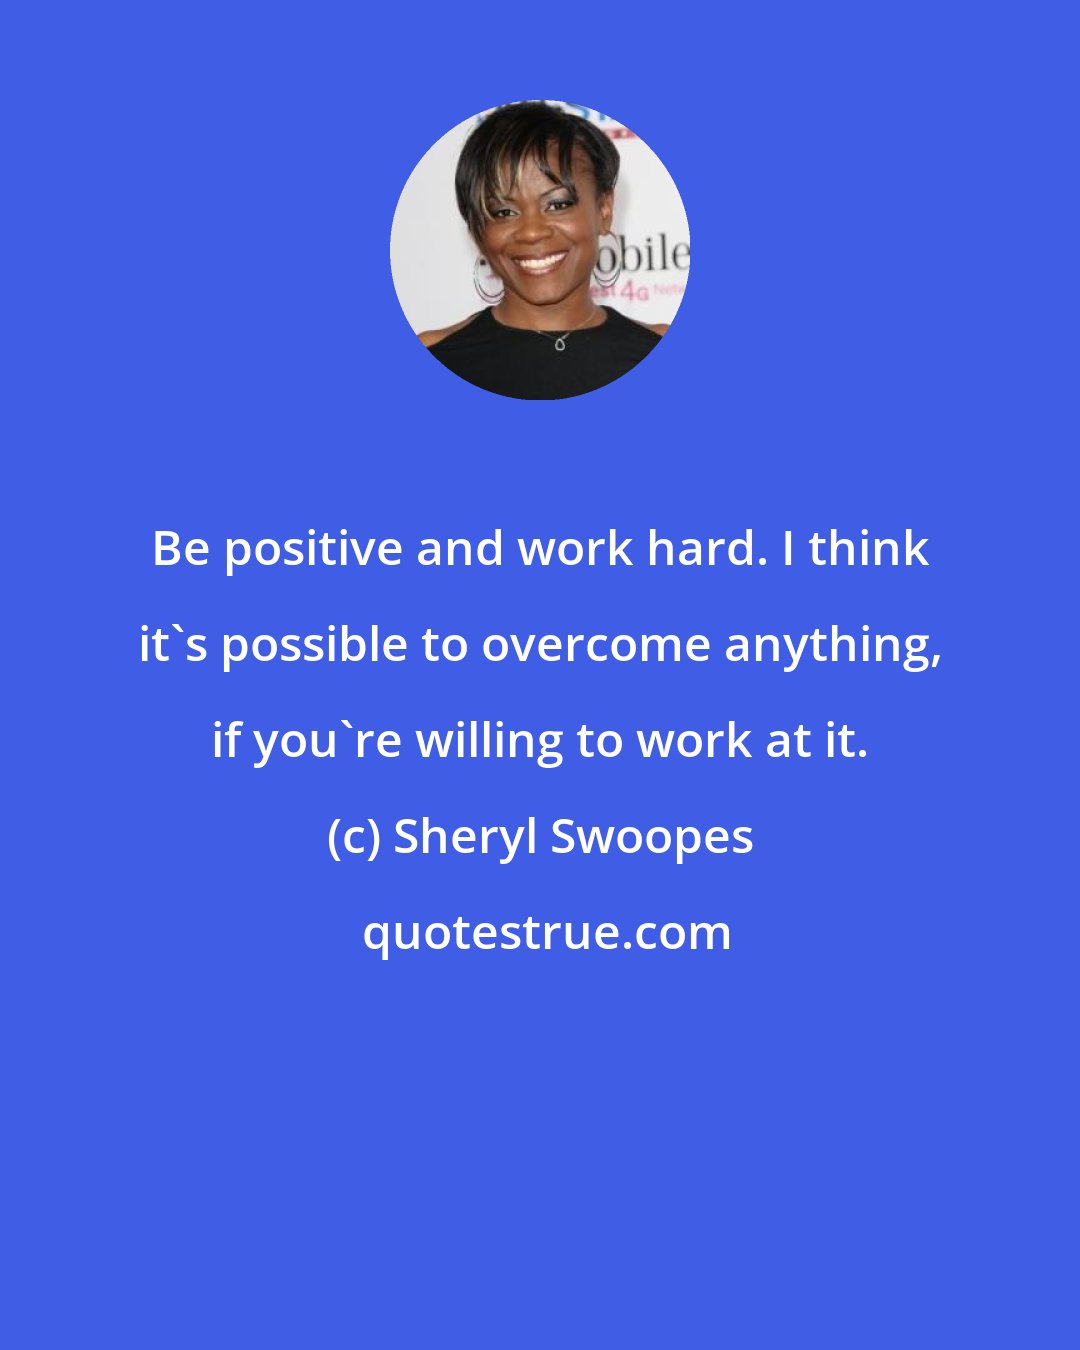 Sheryl Swoopes: Be positive and work hard. I think it's possible to overcome anything, if you're willing to work at it.